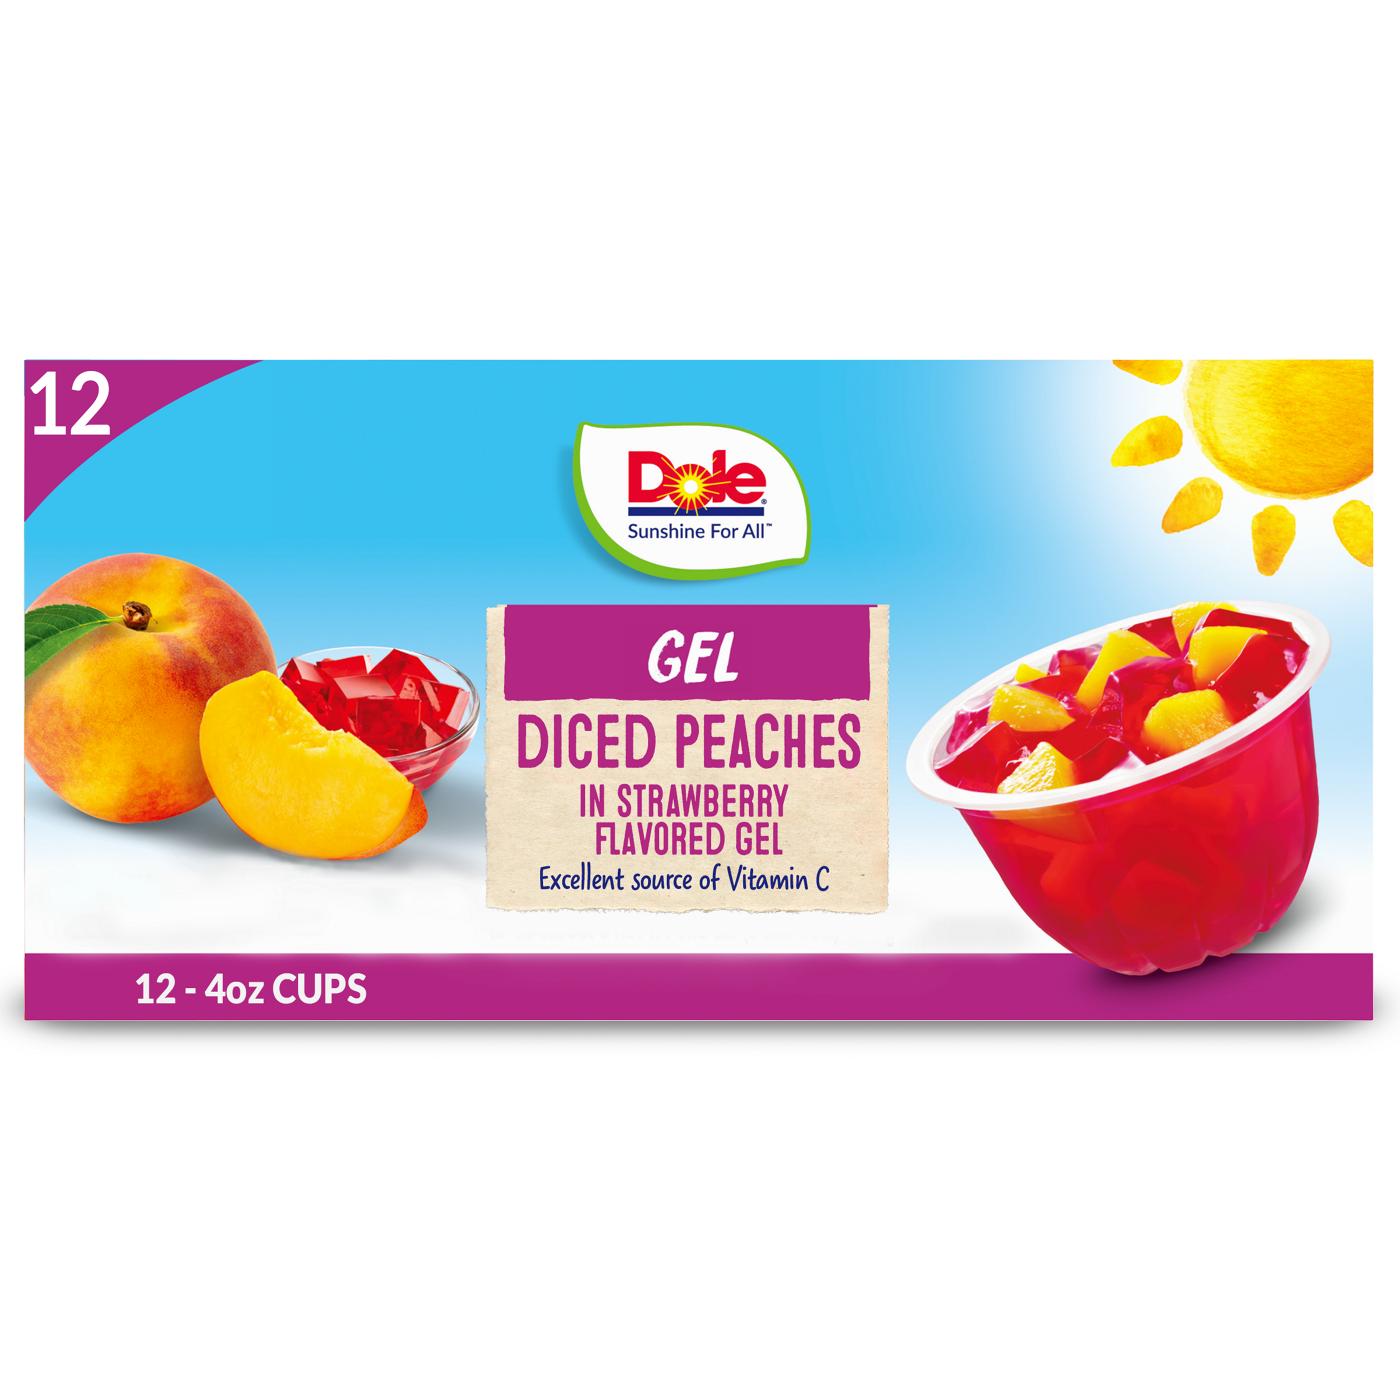 Dole Fruit Bowls - Diced Peaches in Strawberry Flavored Gel; image 1 of 7